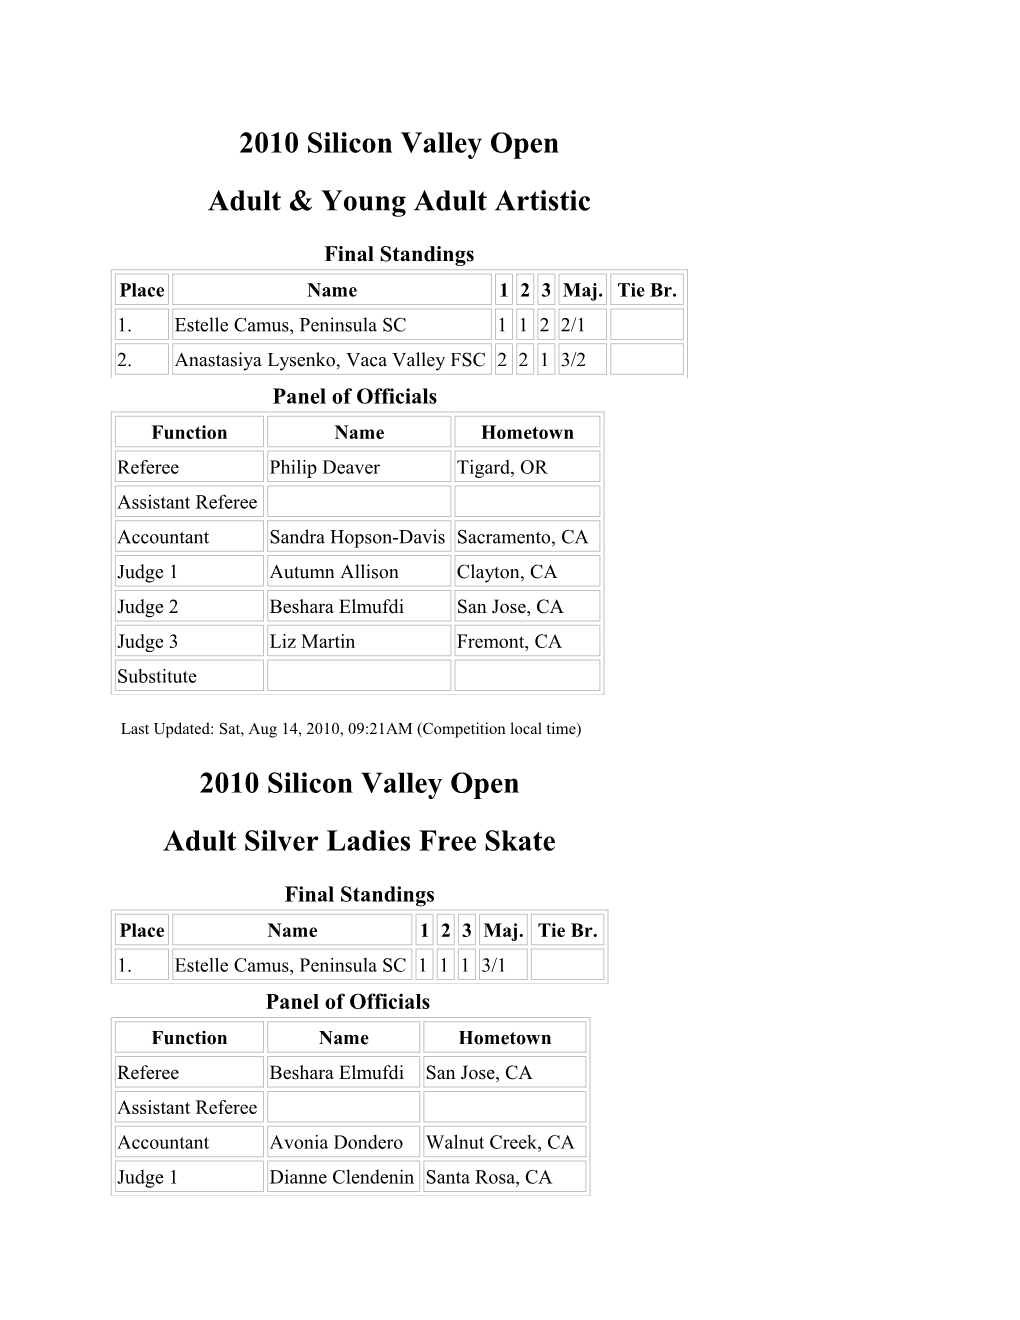 2010 Silicon Valley Open: Adult & Young Adult Artistic